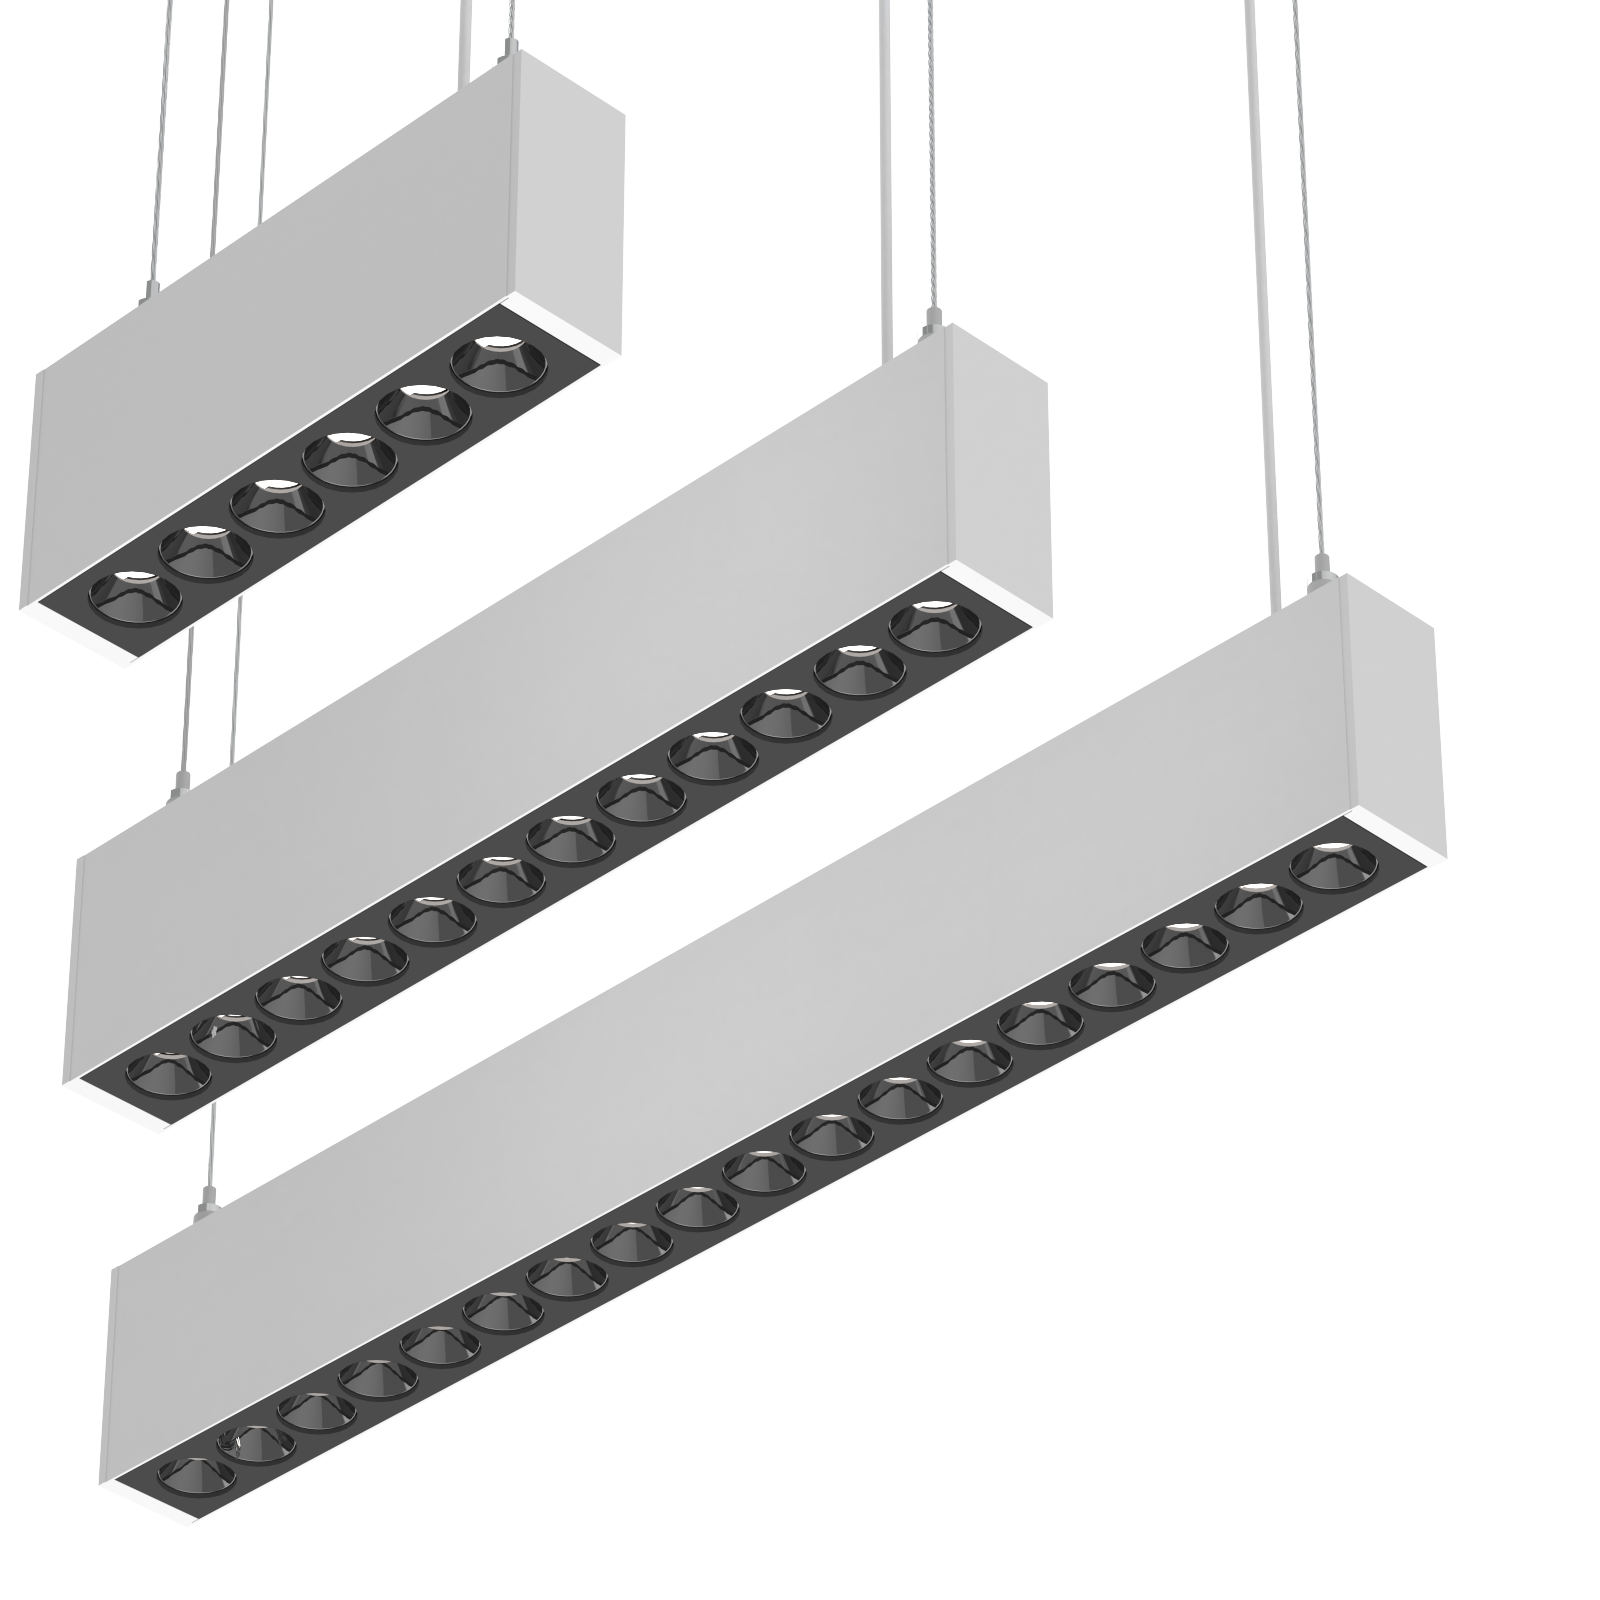 Product Code: MDA140MCO-P
Low Glare (UGR<16) Short Length Linear Pendant for Direct and/or Indirect Lighting 
MICRODash MCO Pendant is a 1.4” linear for mounting on to Armstrong Woodworks® ceiling grid or equivalent. MICRODash MCO Pendant can be supplied with either a remote or integral, field serviceable, on-board driver. MICRODash MCO Pendant brings SmartBeam® capabilities up to a powerful 2000 lumens per foot combined direct and indirect. It’s small size designed to compliment architectural space. MICRODash MCO Woodworks® is fully field serviceable and can be supplied in continuous runs and a variety of visually appealing shapes.